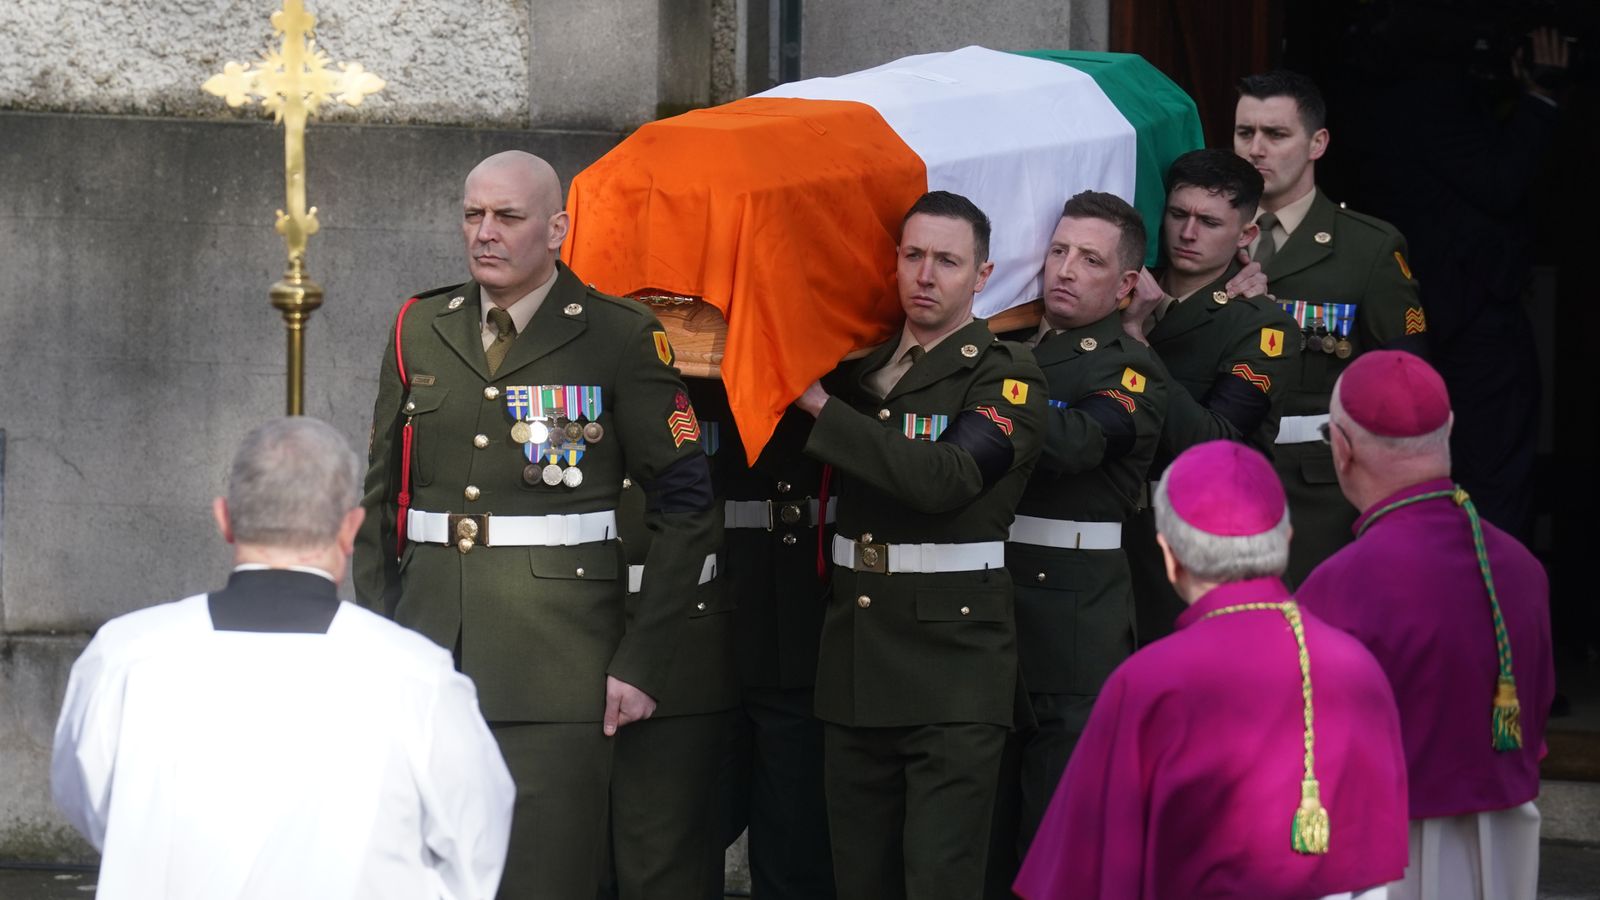 John Bruton funeral: Irish leaders pay respects as former taoiseach is laid to rest